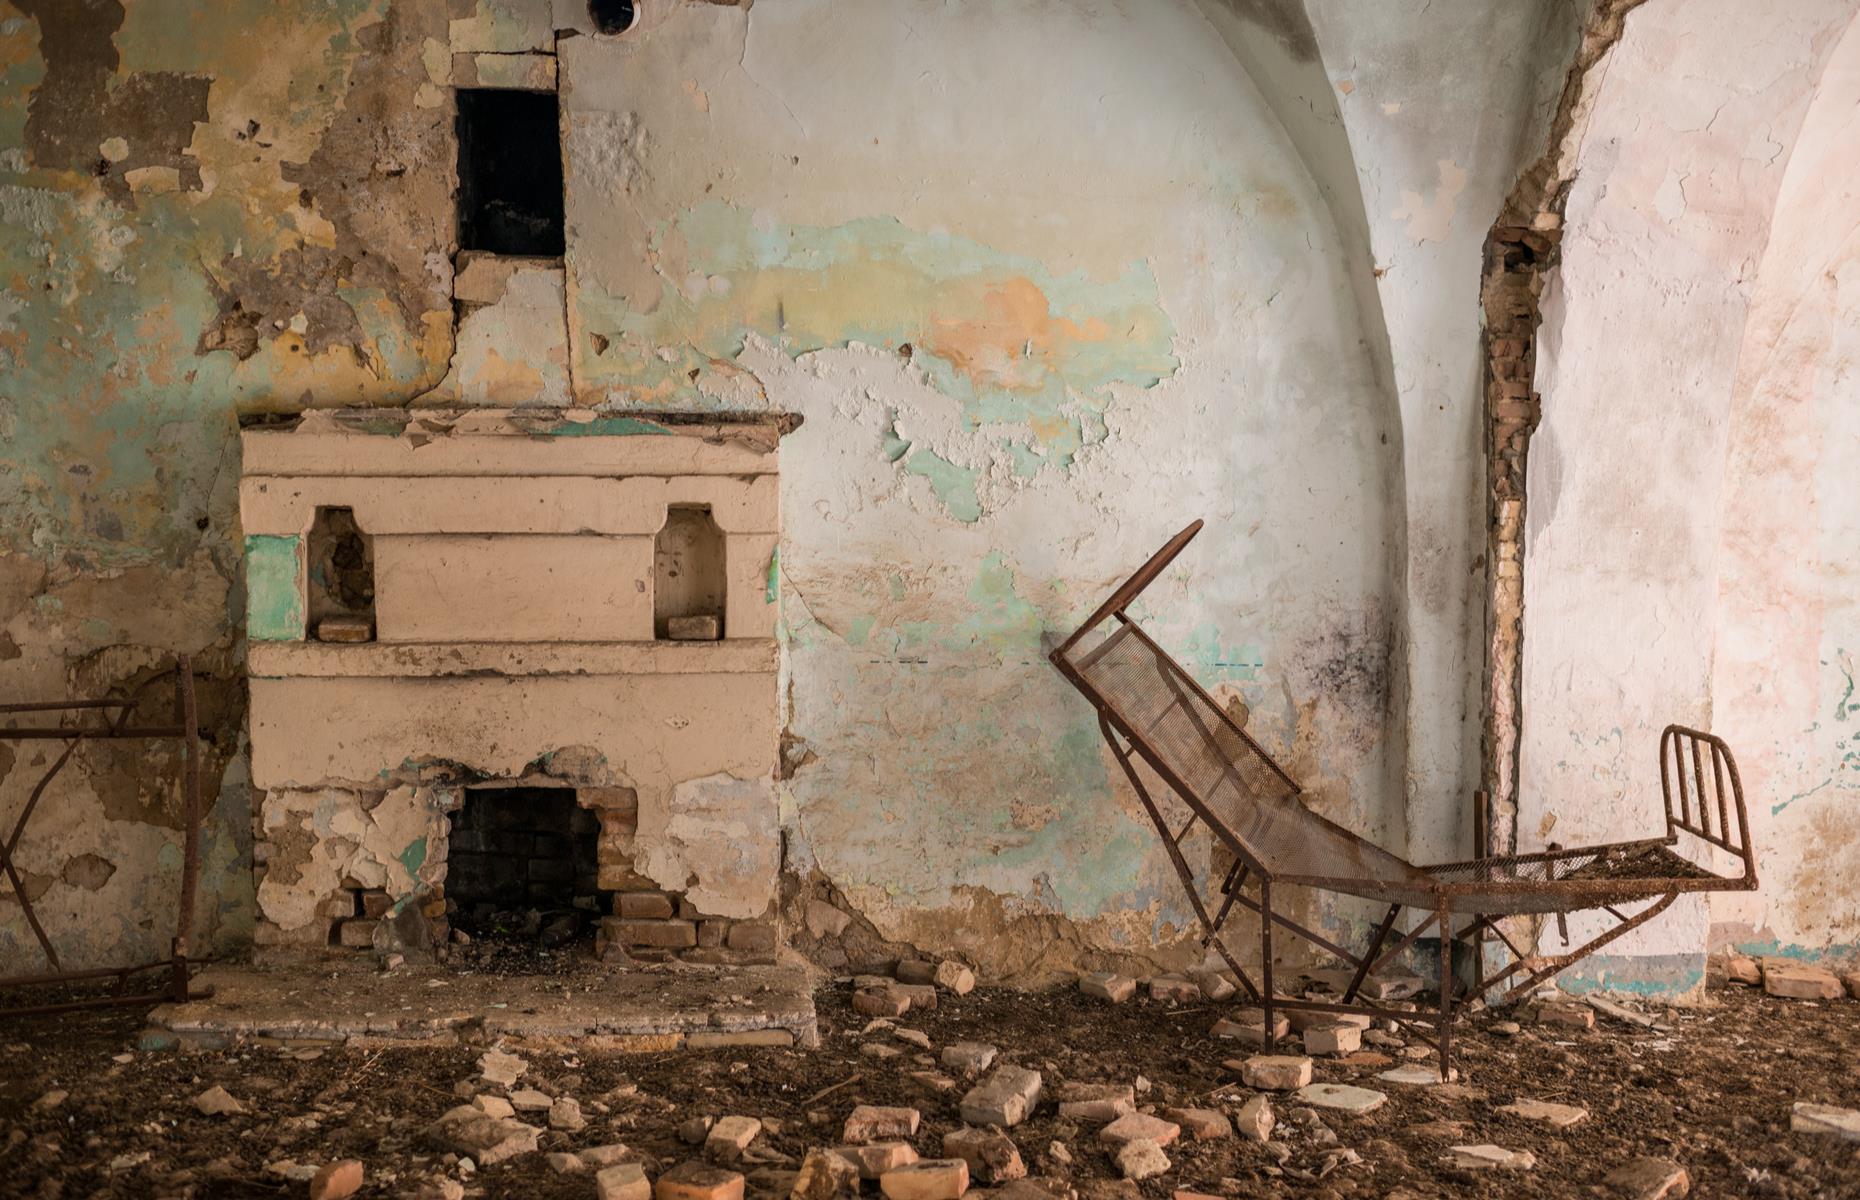 <p>Inside the remaining buildings, signs of domesticity remain, with a hearth and bed frame still visible in this dilapidated house. These days Craco is blocked off for safety reasons, however, private guided tours are now available for curious tourists.</p>